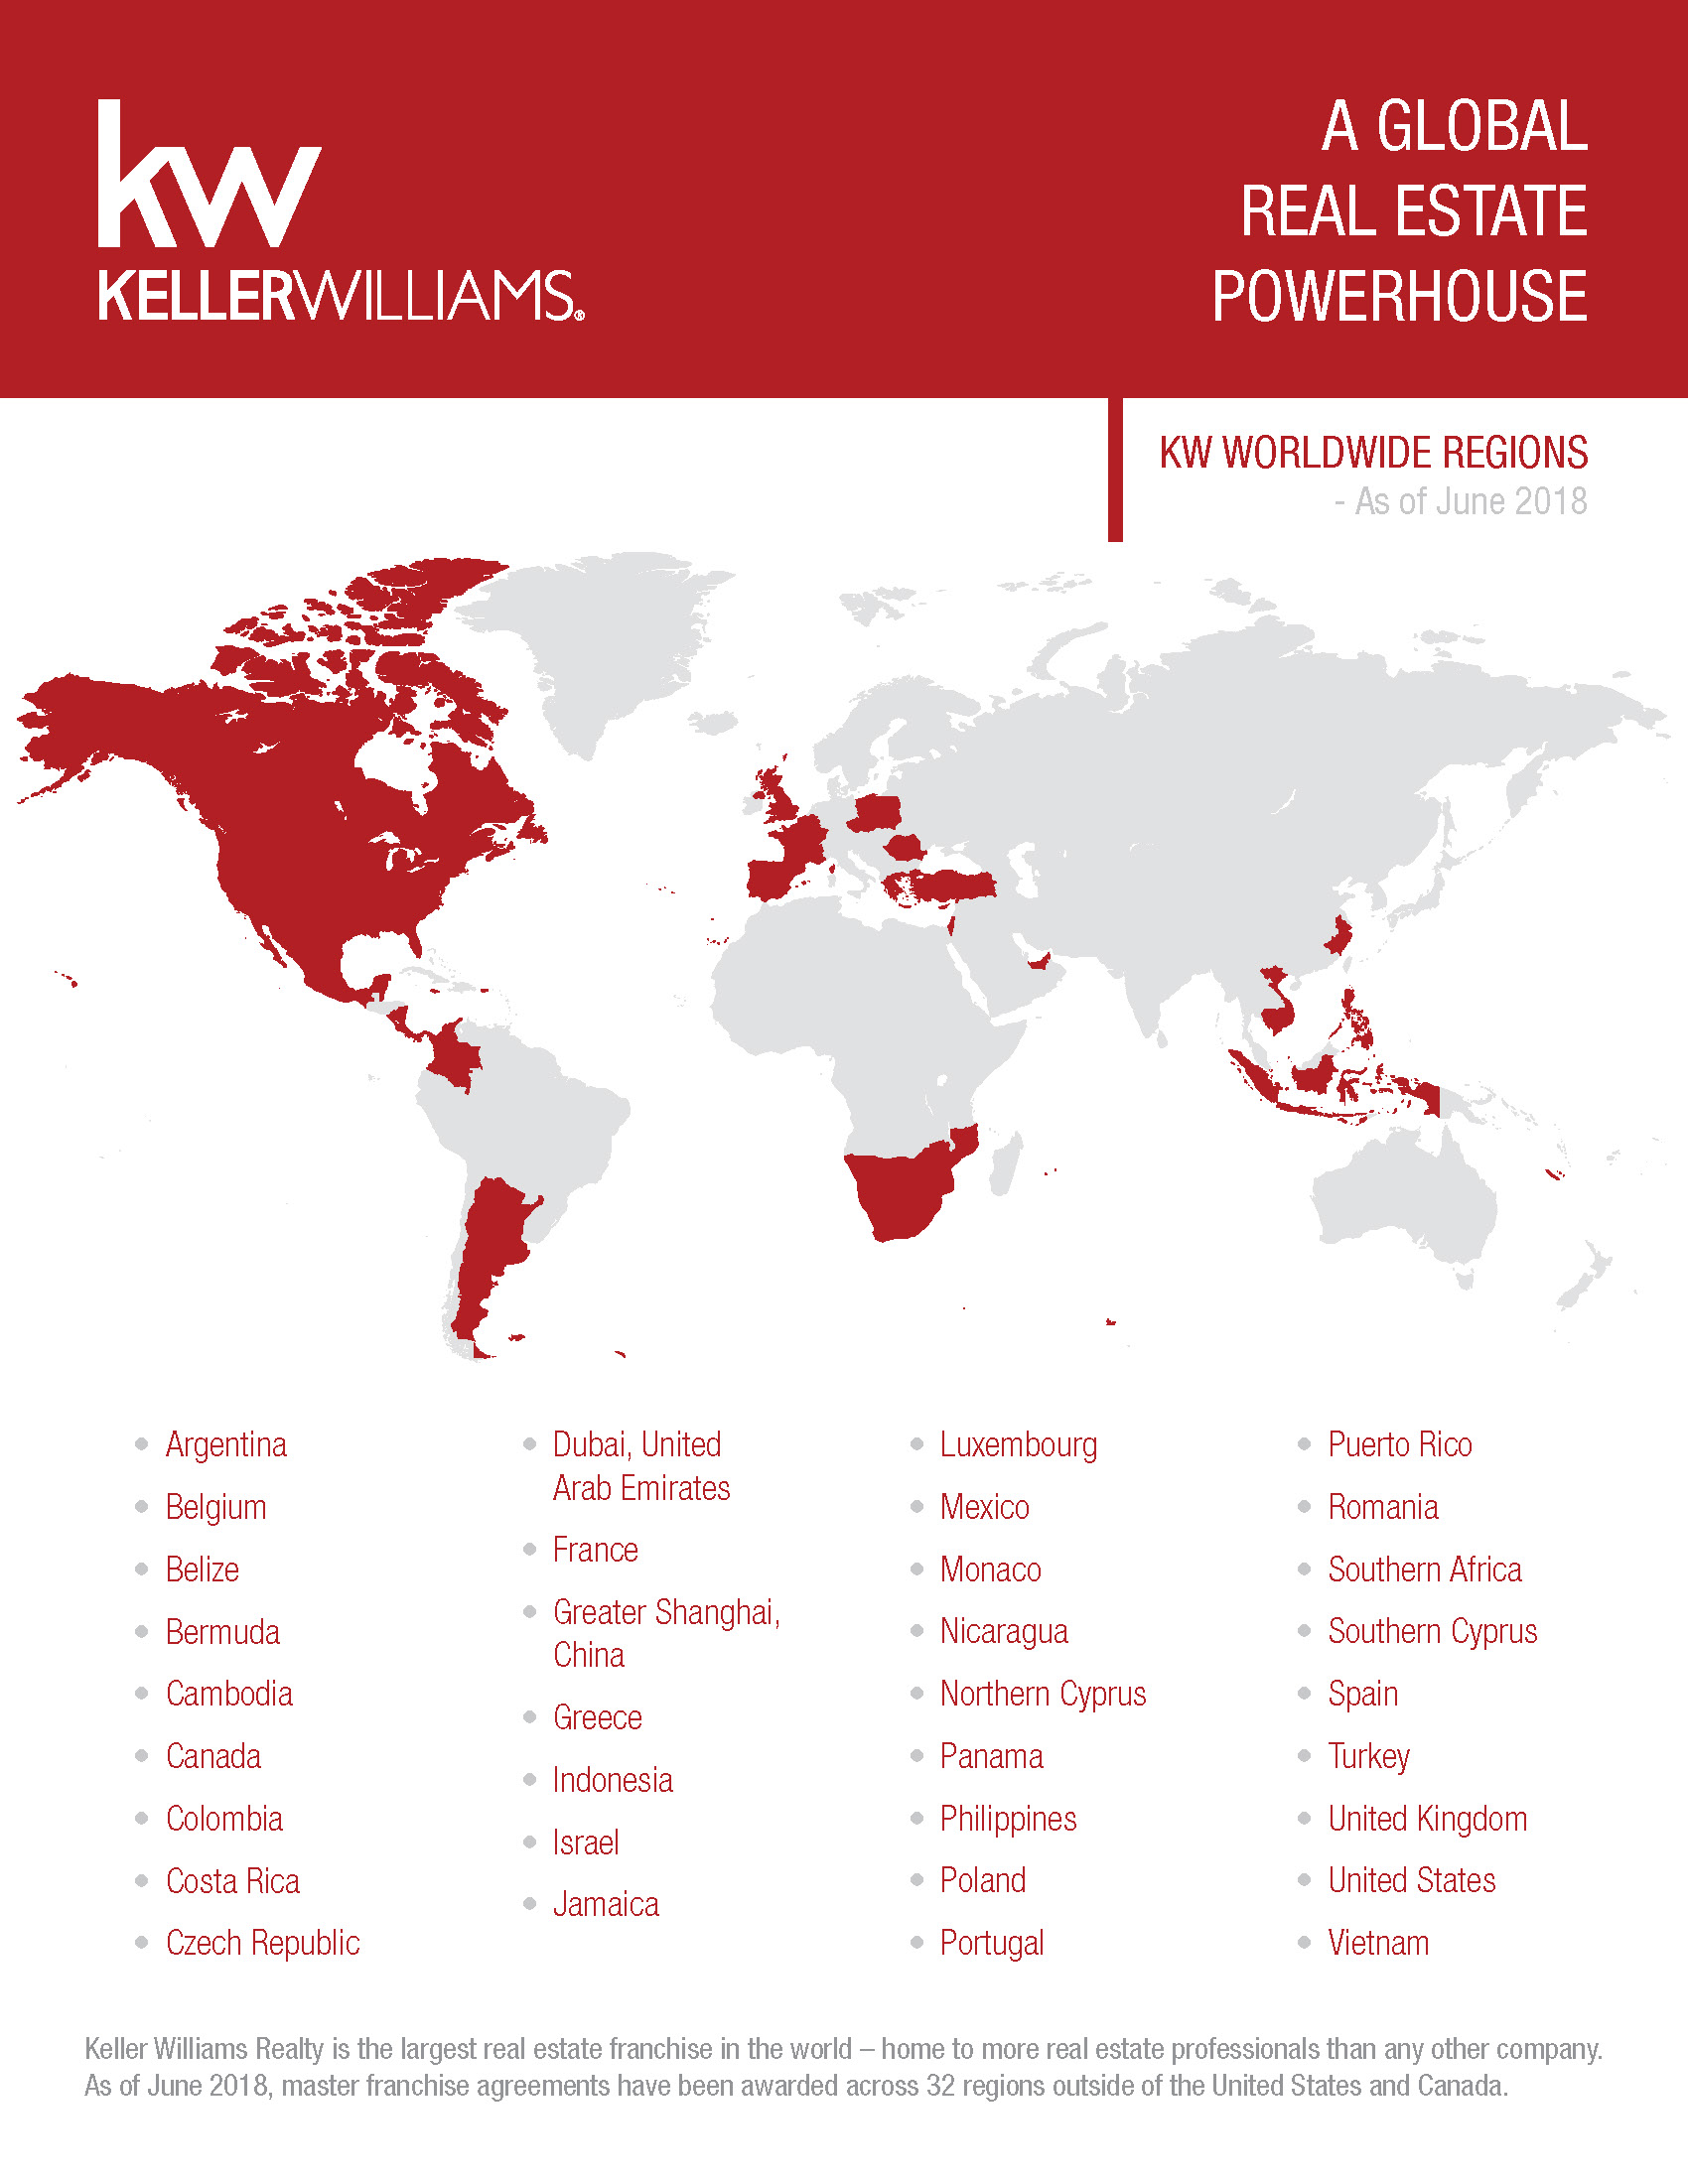 Keller Williams continues to grow around the world!